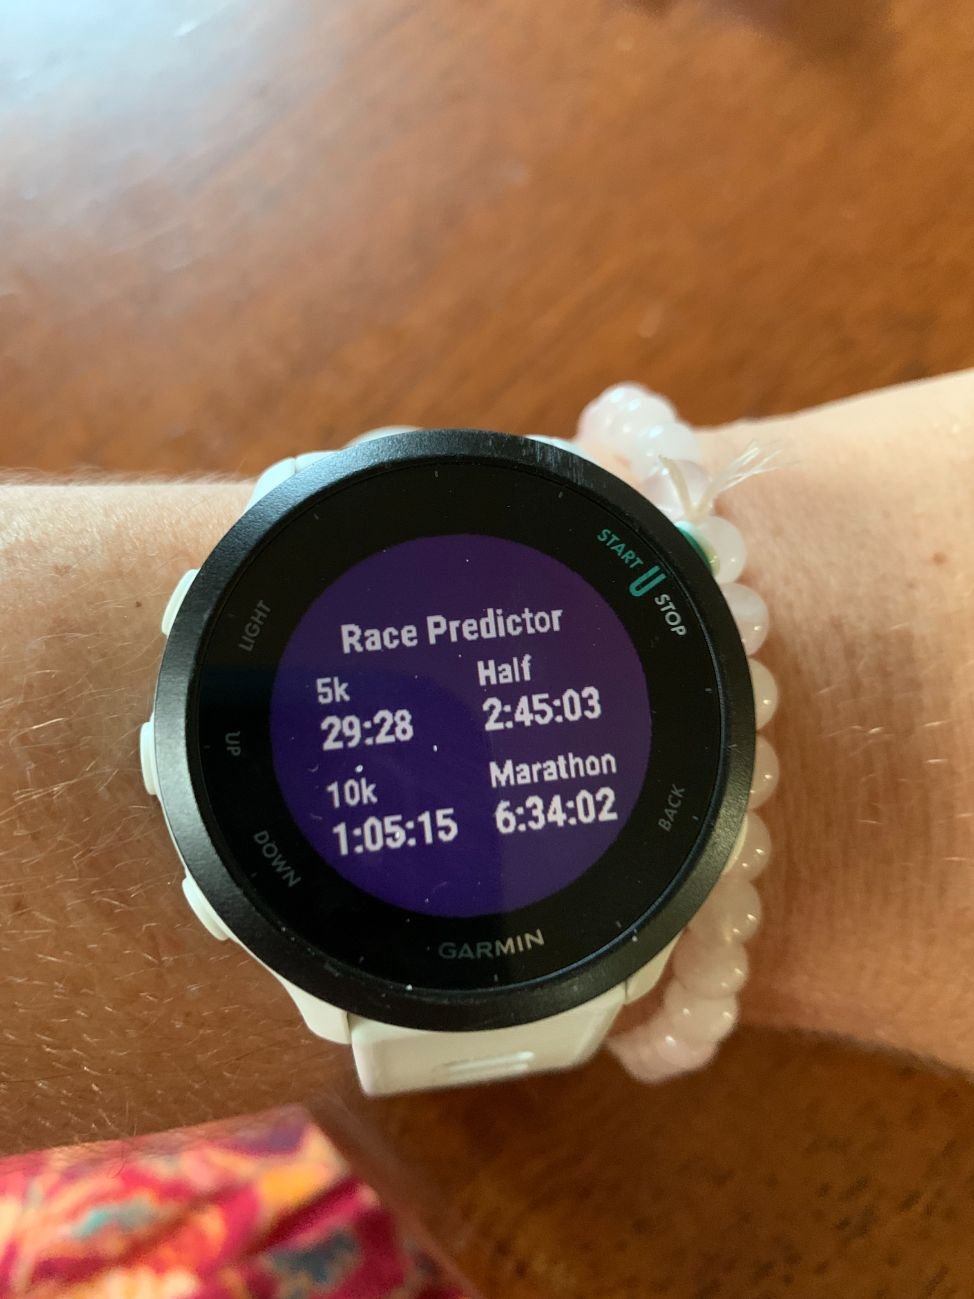 New to Garmin! Just got my Forerunner 55. Any tips, suggestions or